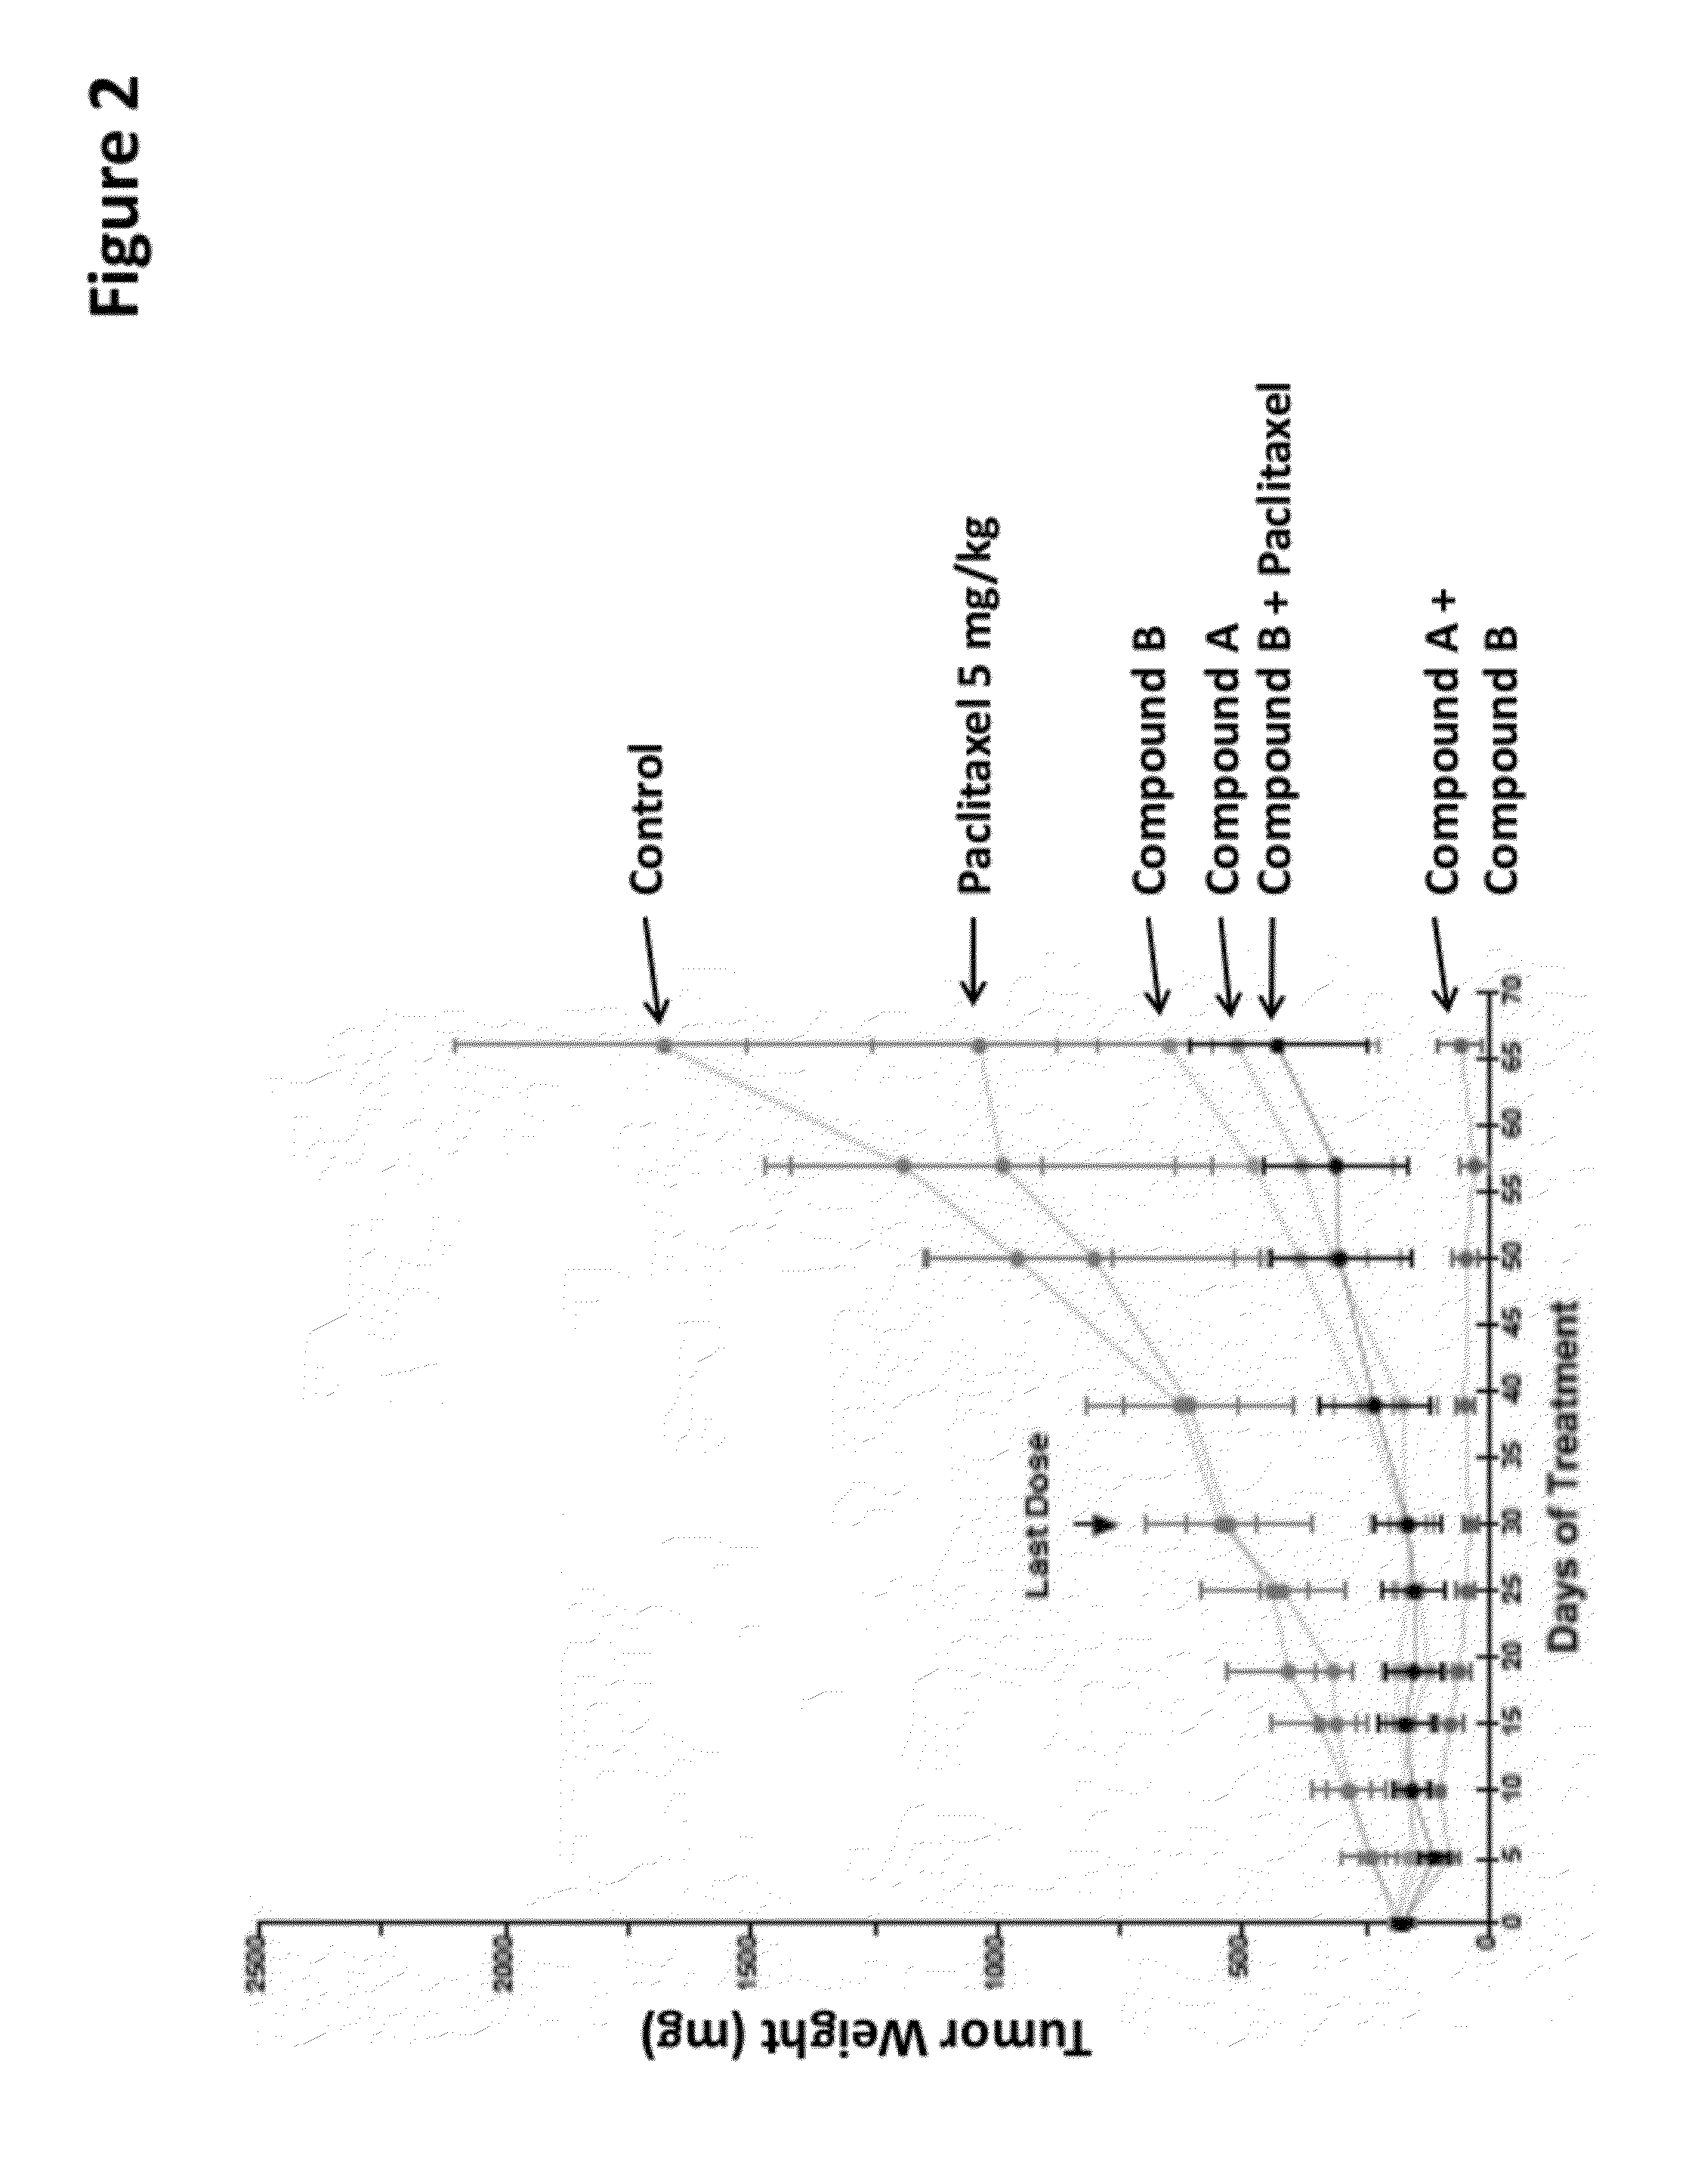 Combination of kinase inhibitors and uses thereof